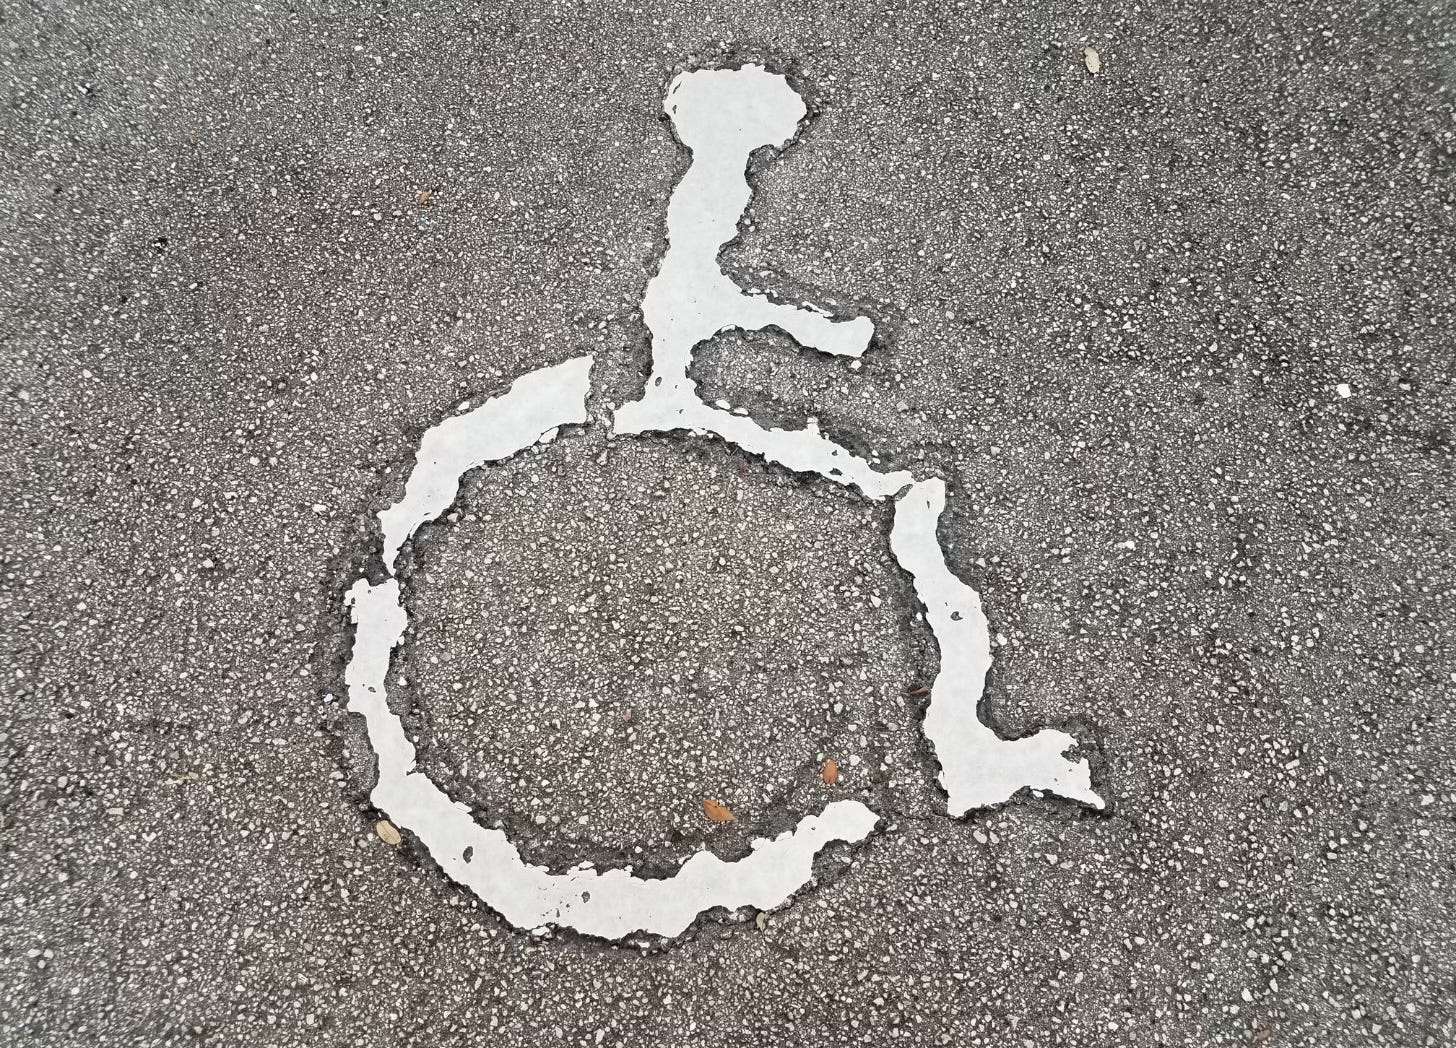 Rough, eroded wheelchair symbol painted on pavement